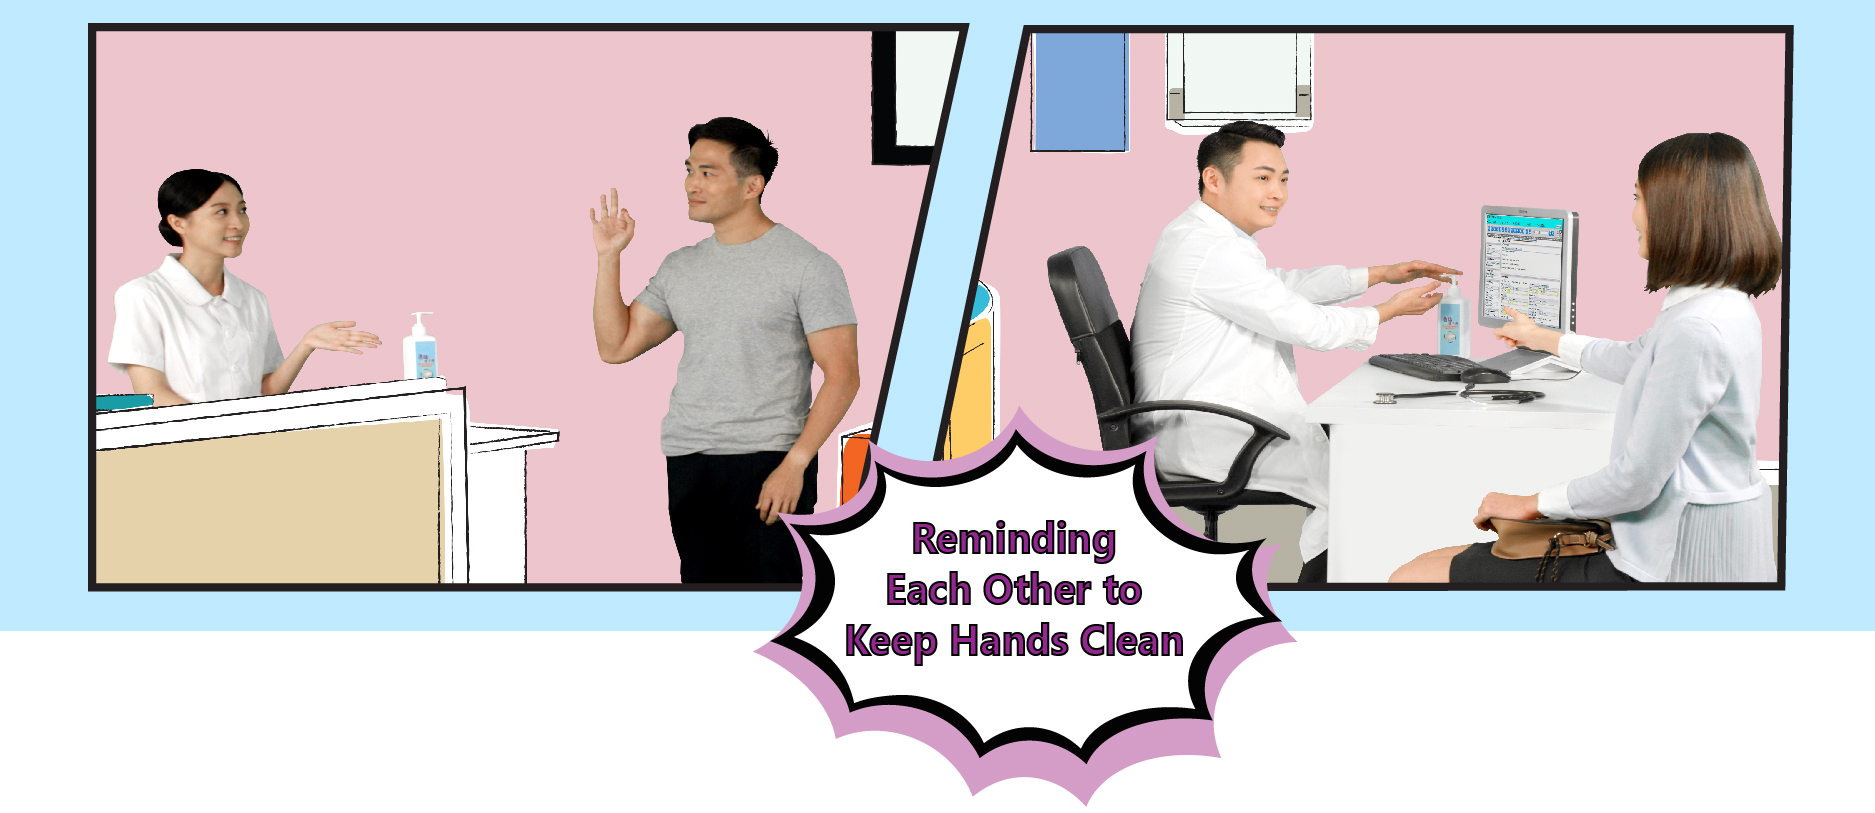 Reminding Each Other to Keep Hands Clean at CLINIC